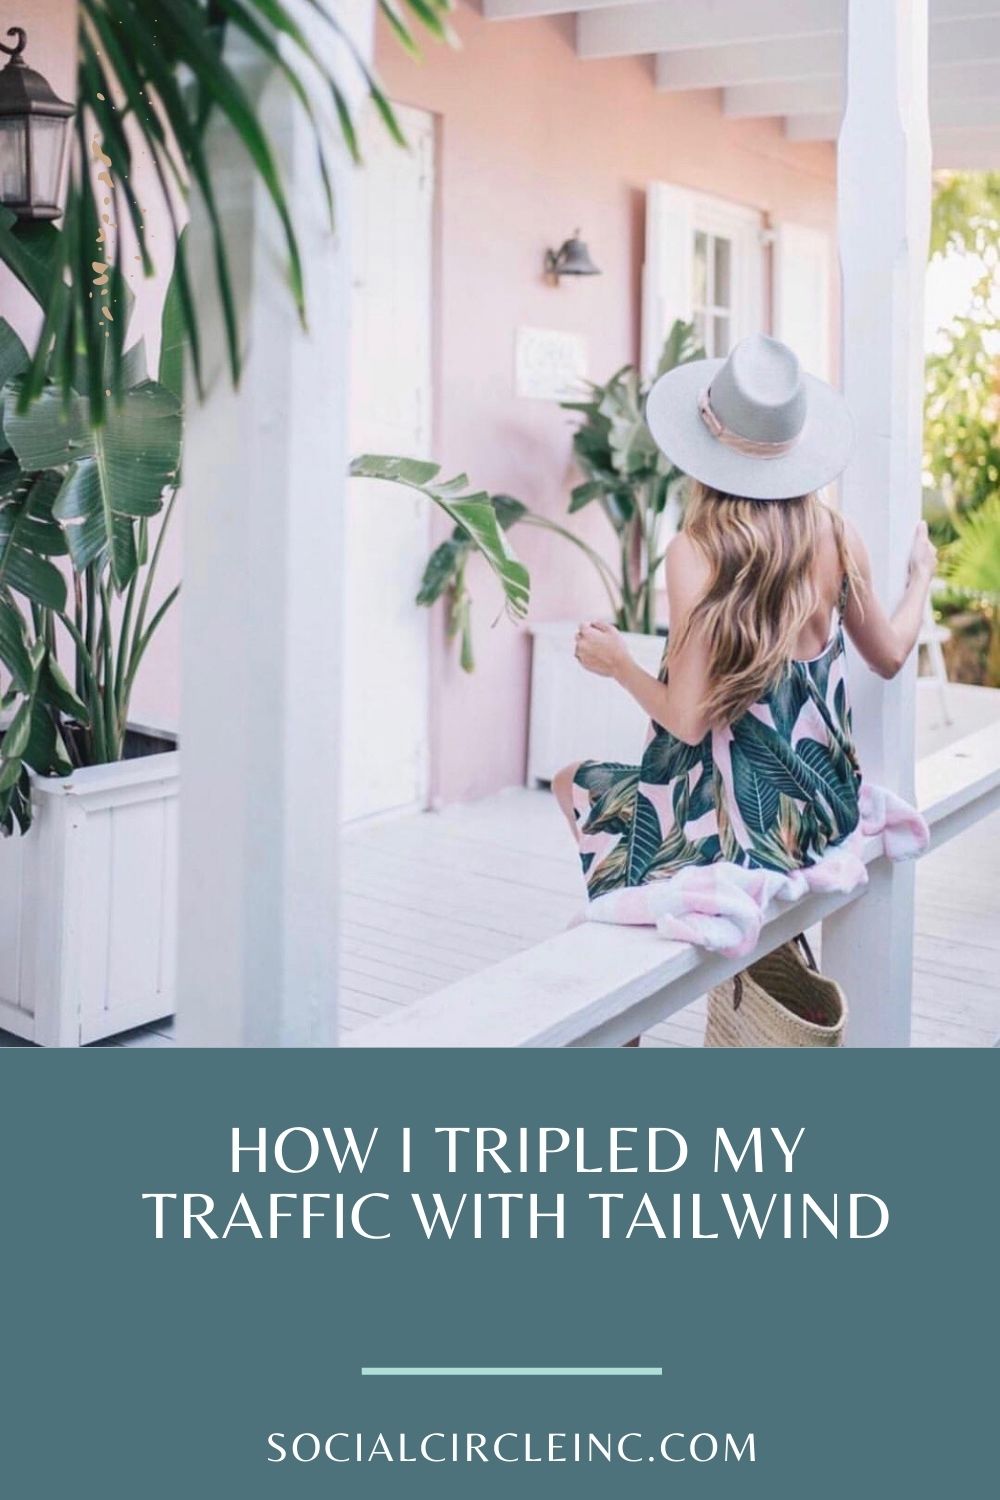 How I tripled My Traffic with Tailwind